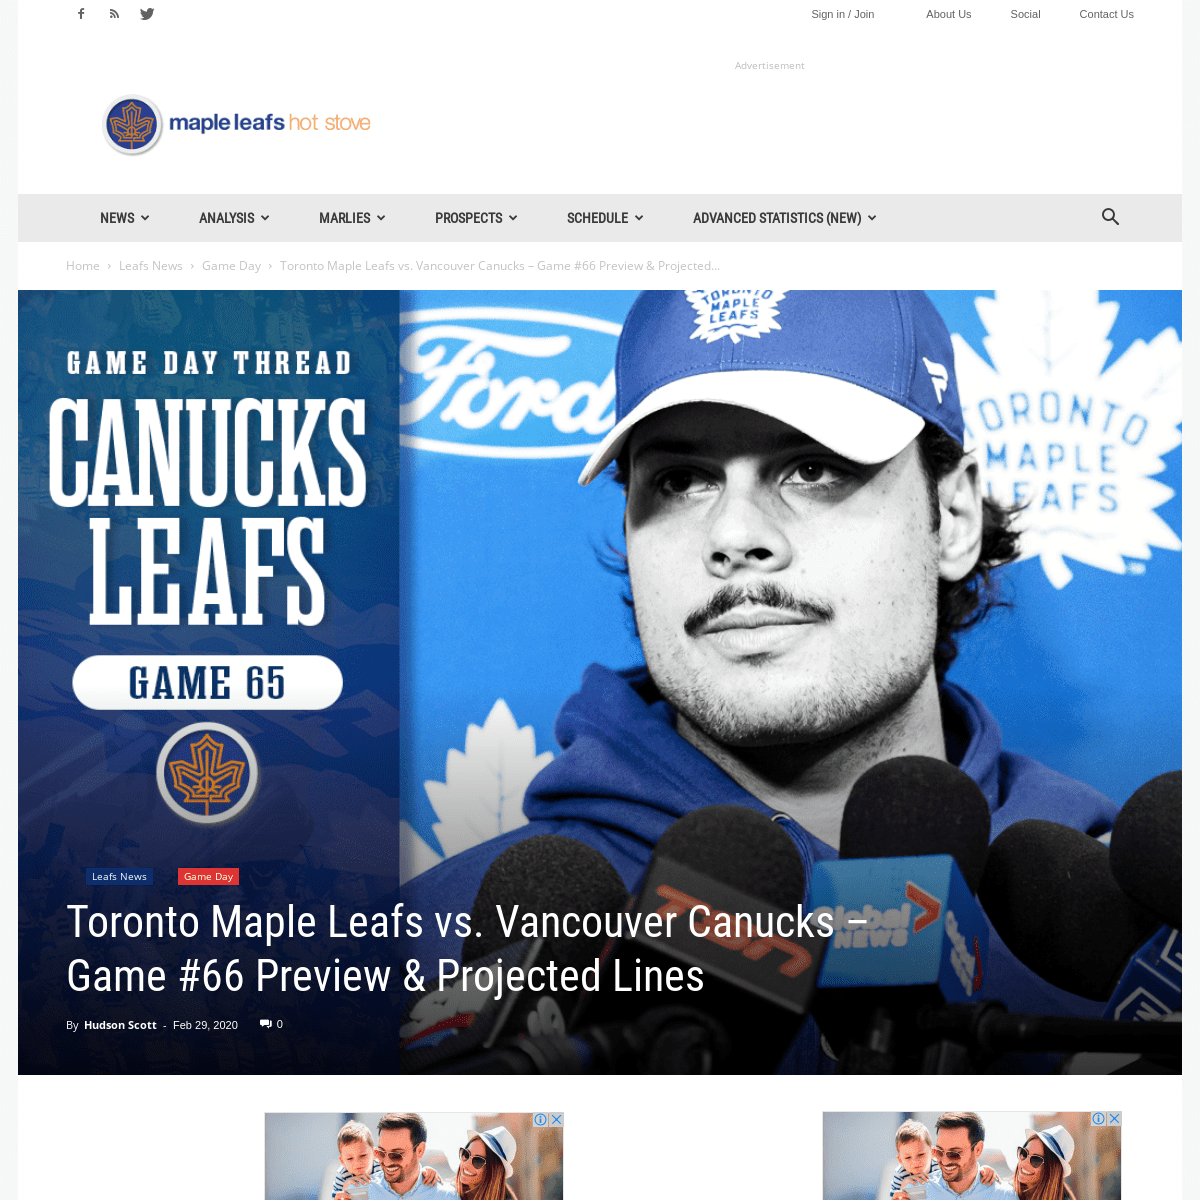 A complete backup of mapleleafshotstove.com/2020/02/29/toronto-maple-leafs-vs-vancouver-canucks-game-66-preview-projected-lines/